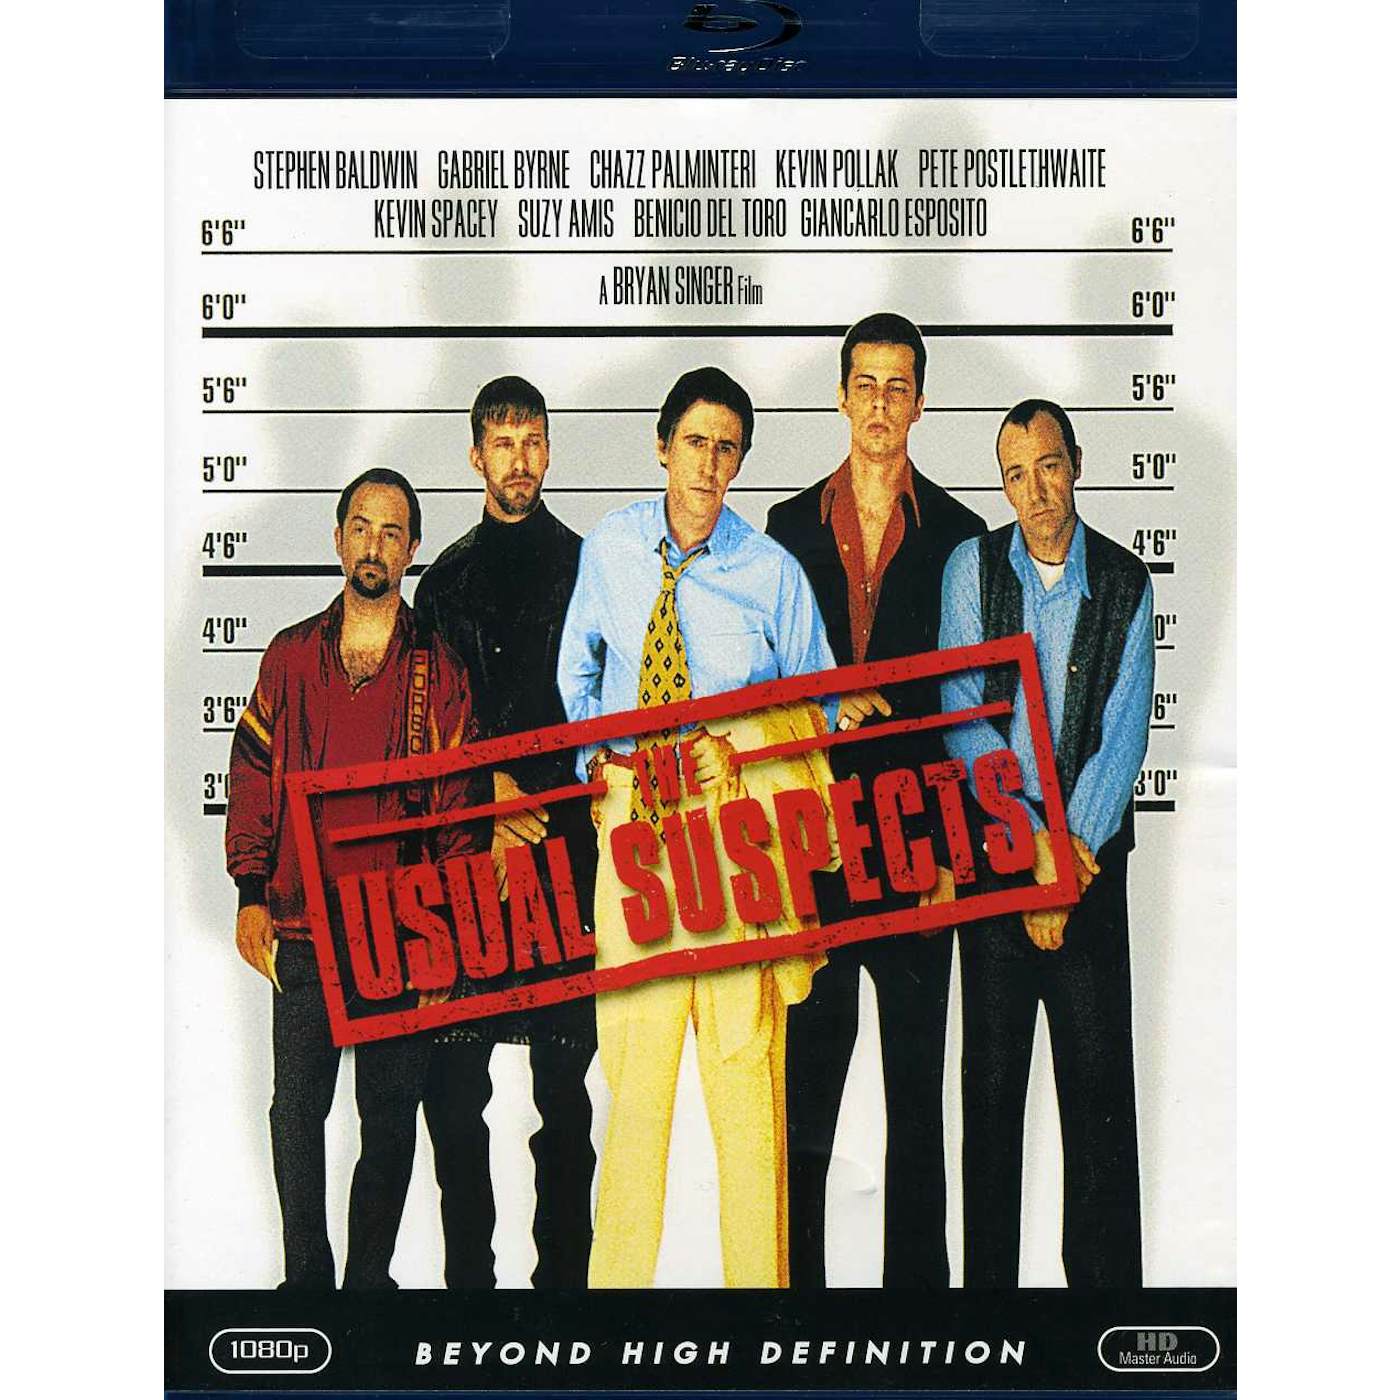 USUAL SUSPECTS Blu-ray